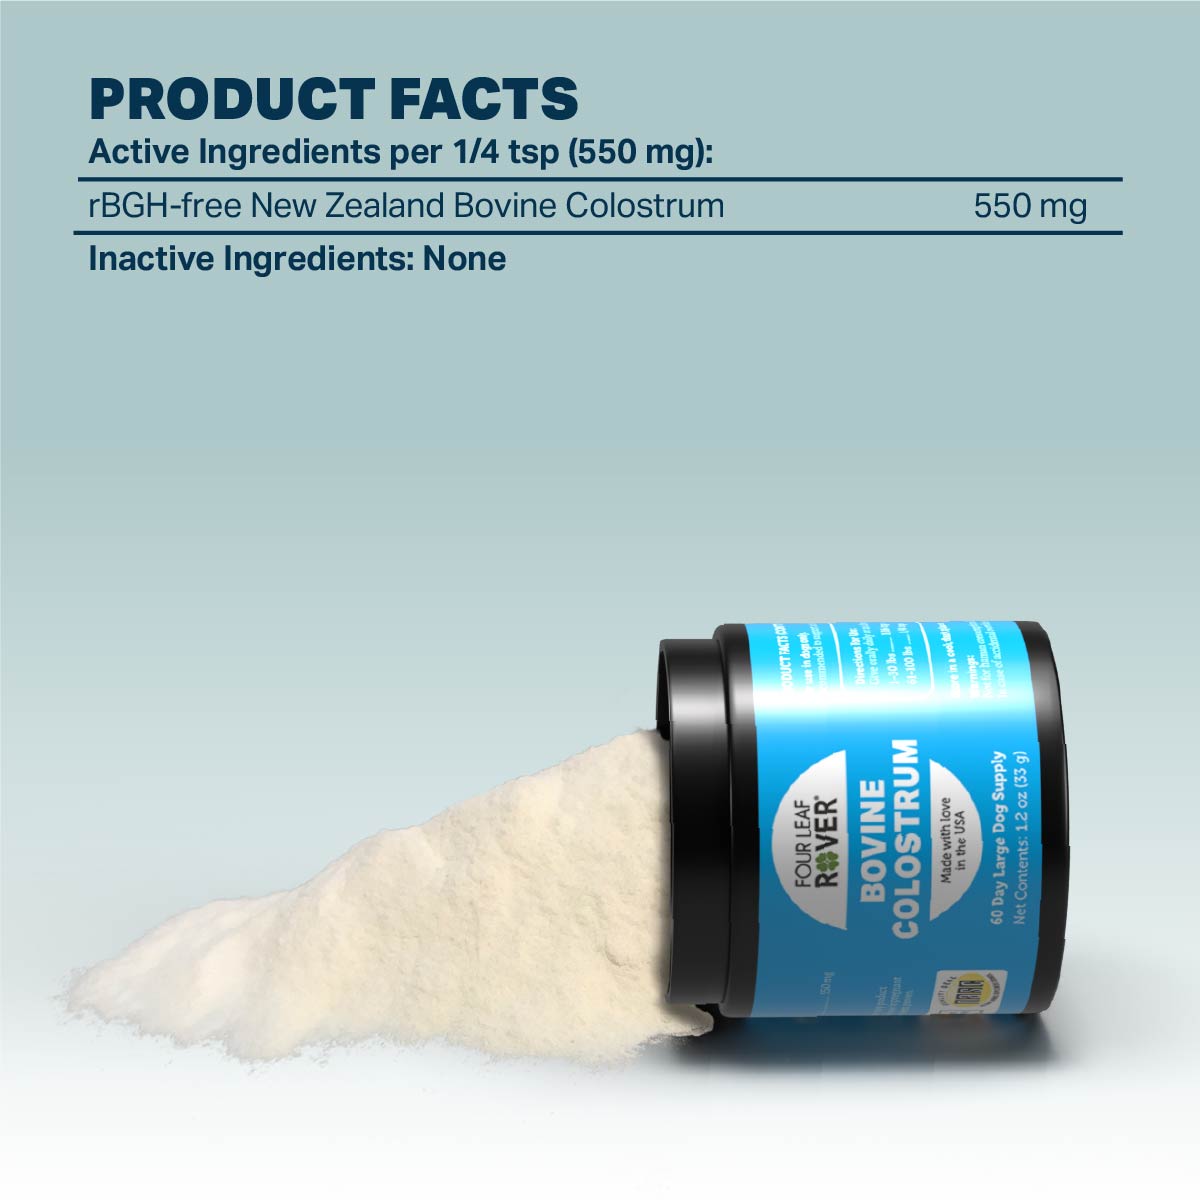 Four Leaf Rover Bovine Colostrum container tipped on its side showcasing the powder supplement spilling out. The text reads "PRODUCT FACTS Active Ingredients per 1/4 tsp (550 mg): rBGH-free New Zealand Bovine Colostrum 550mg Inactive Ingredients: None"